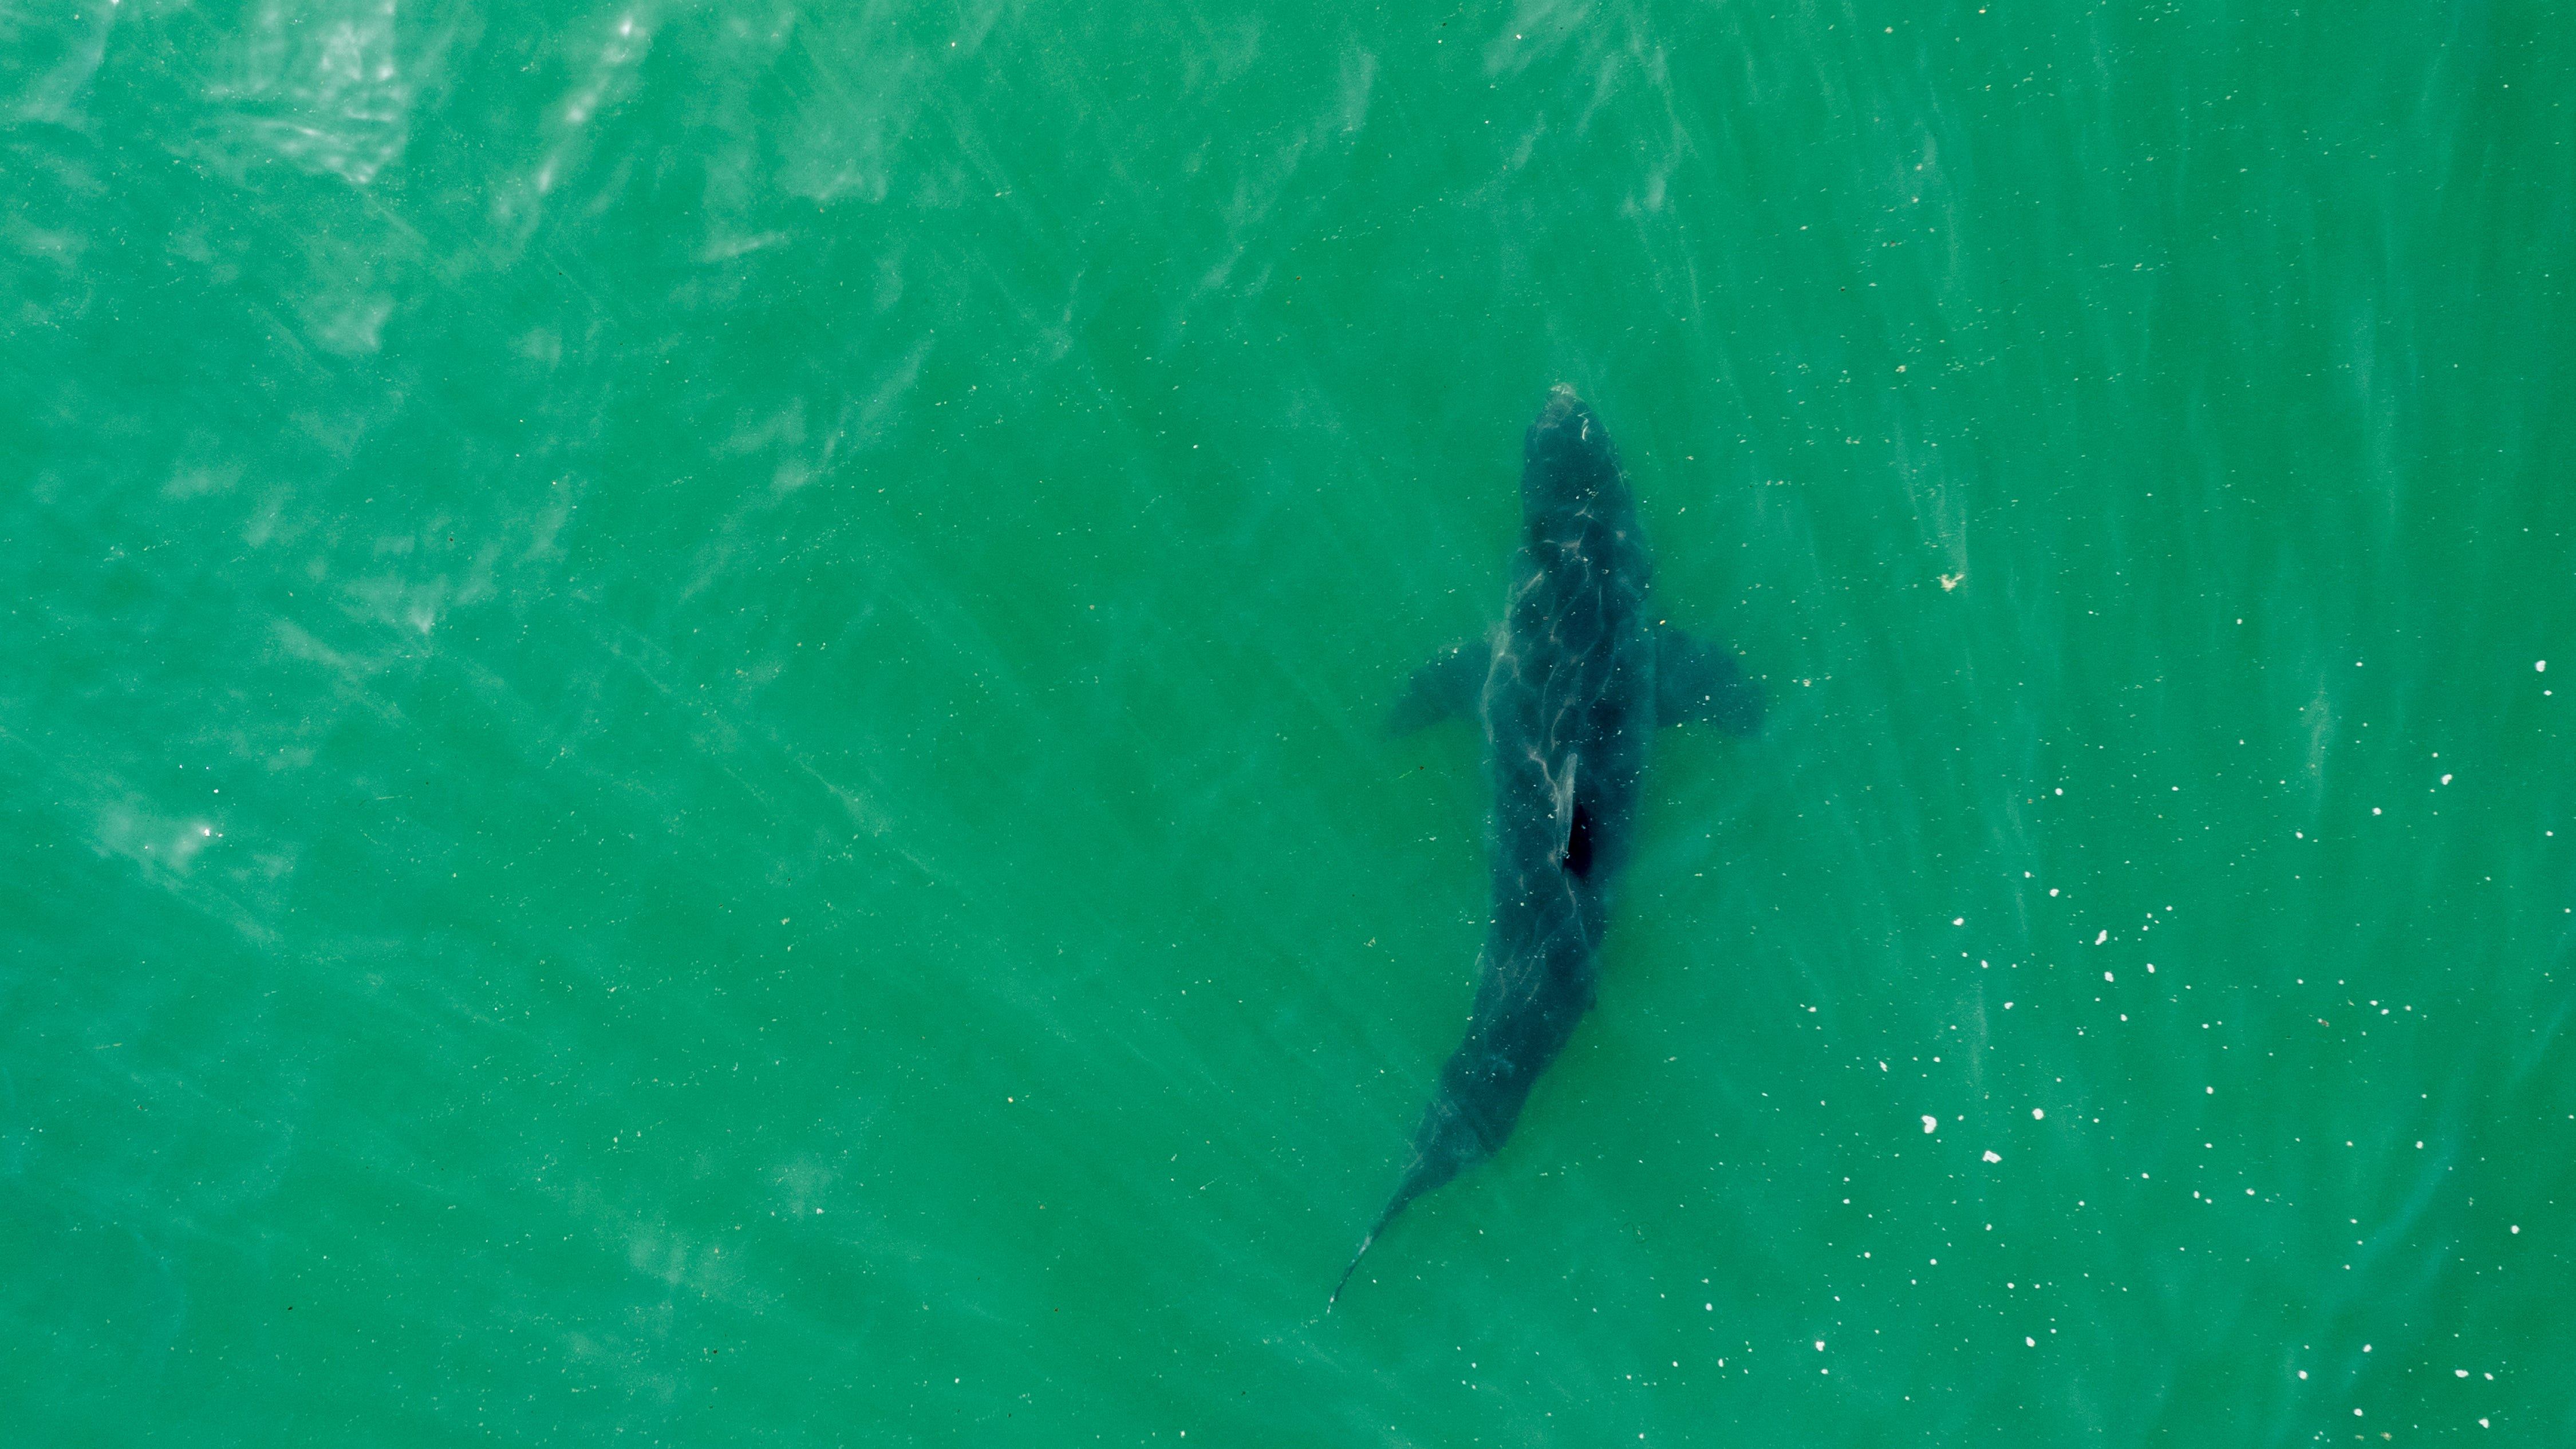 Great white sharks at California beaches: What scientists are finding